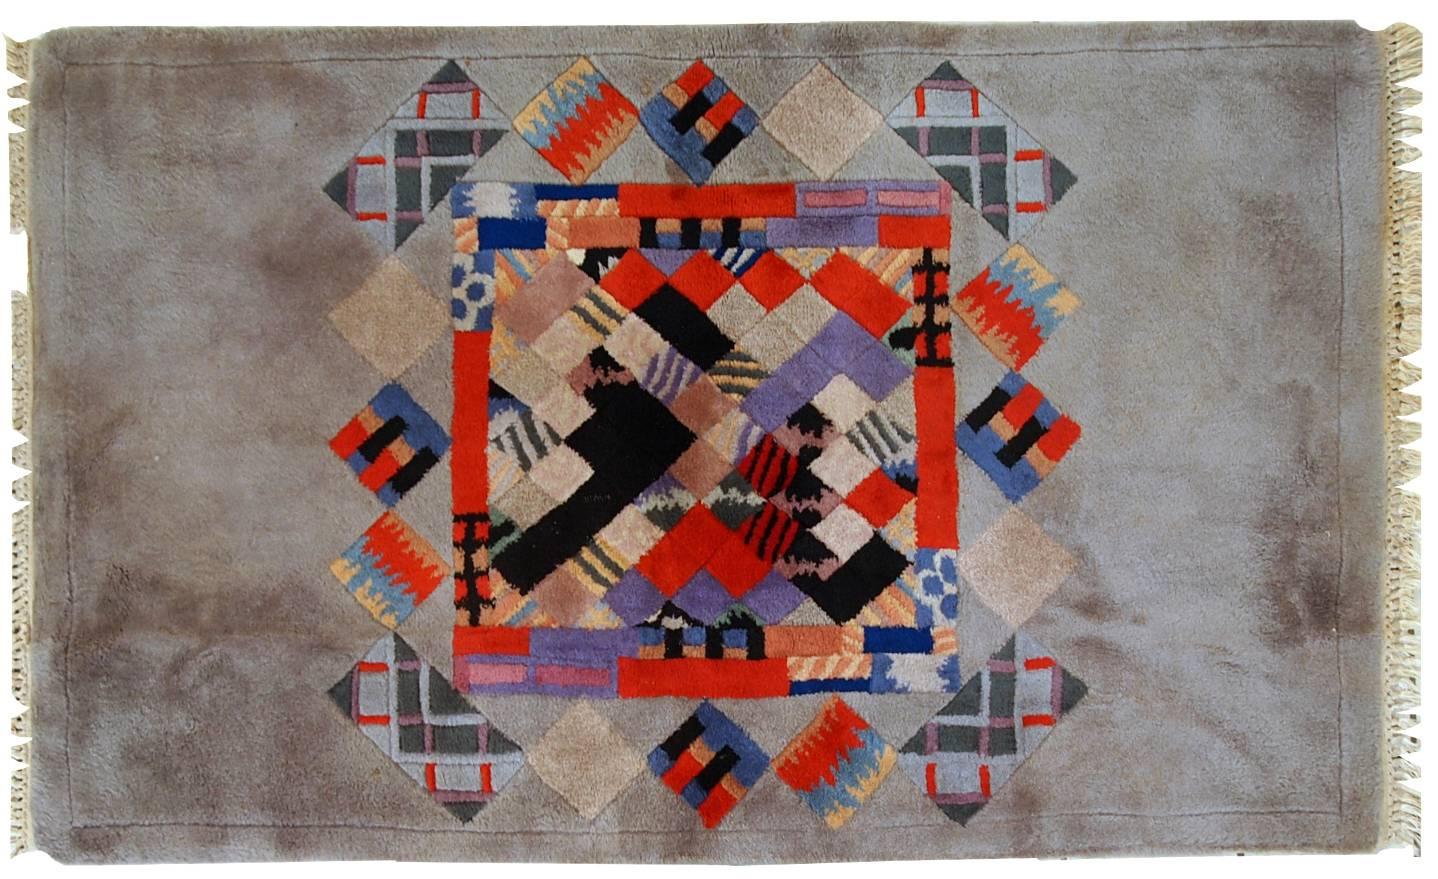 Vintage Tibetan rug with abstract design from Nepal. This masterpiece is from 1980s represents the time of futuristic modernists. Bright shades in the style of Kandinsky on the silver grey background. The rug is handmade and in original good